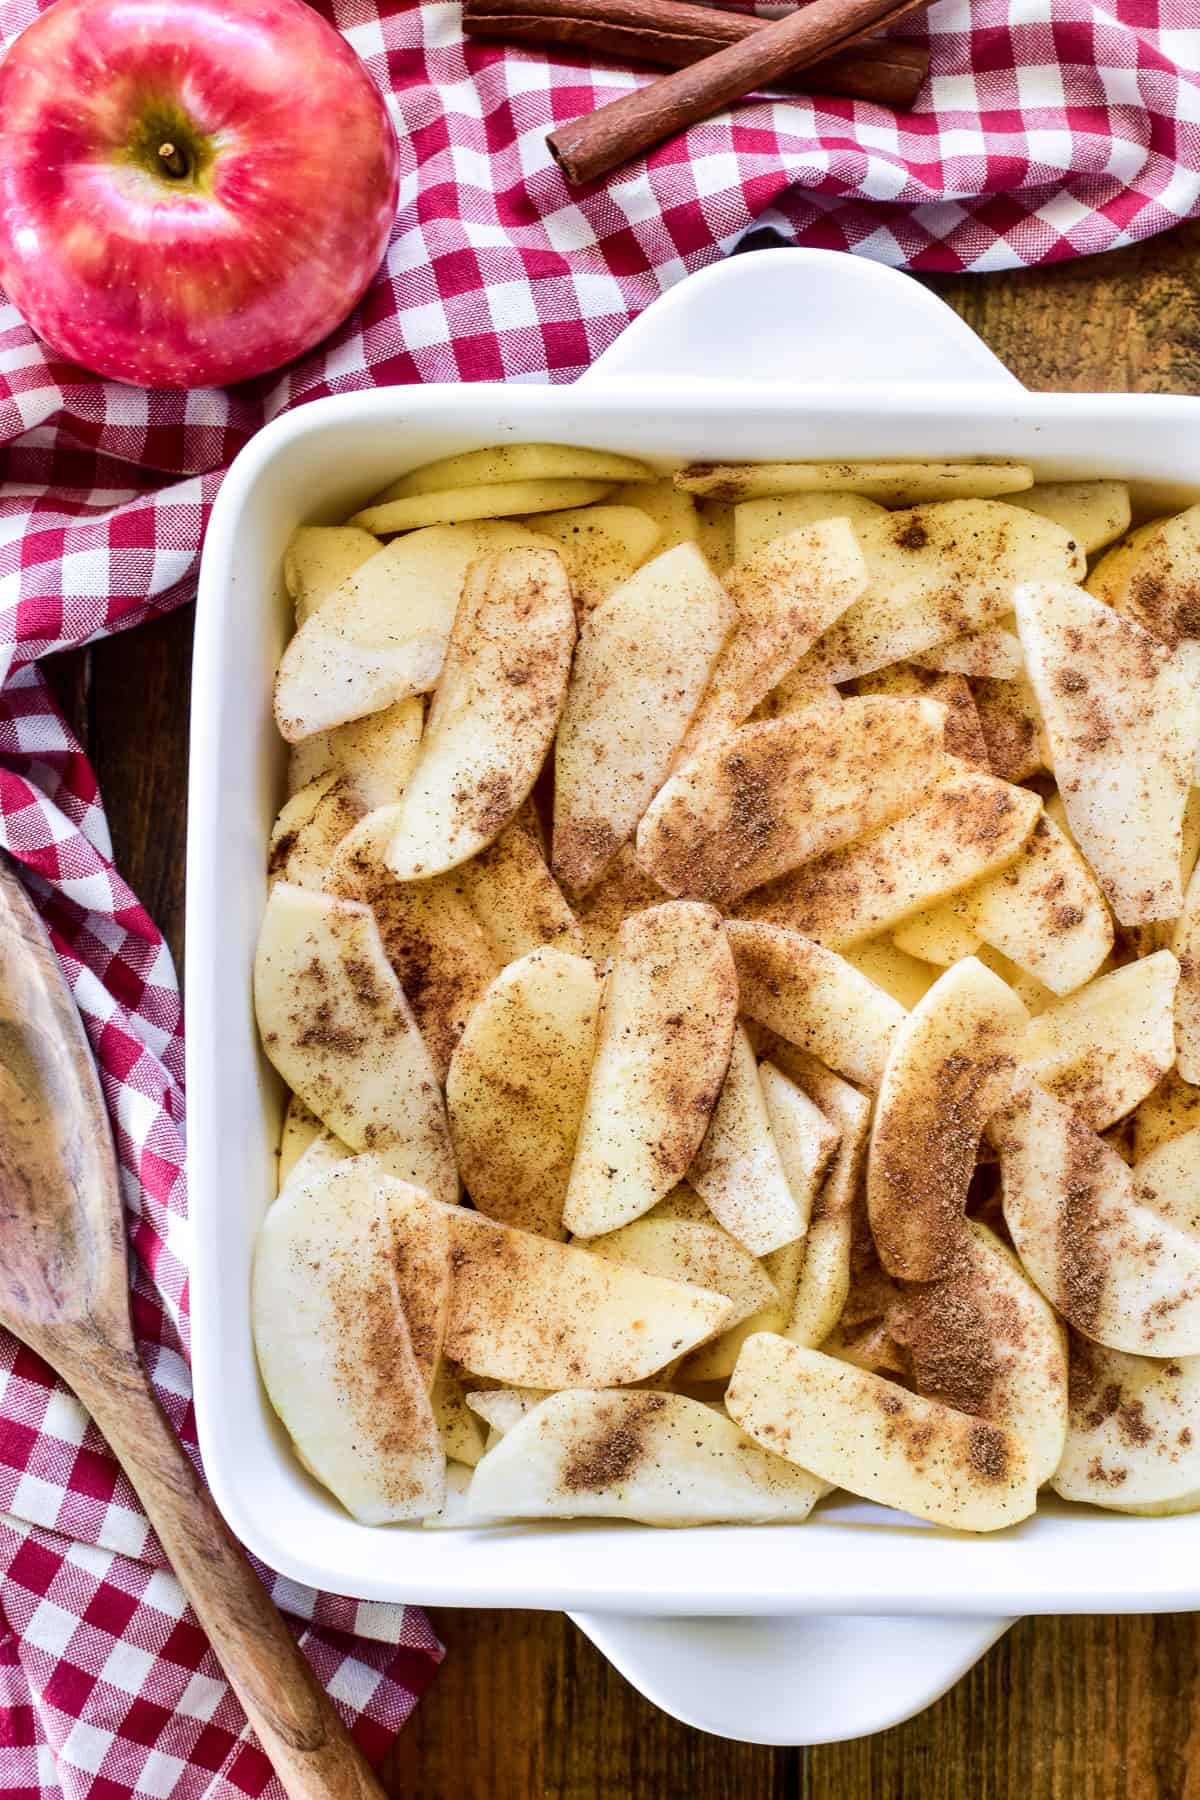 Sliced apples & pears sprinkled with apple pie spice in a baking dish